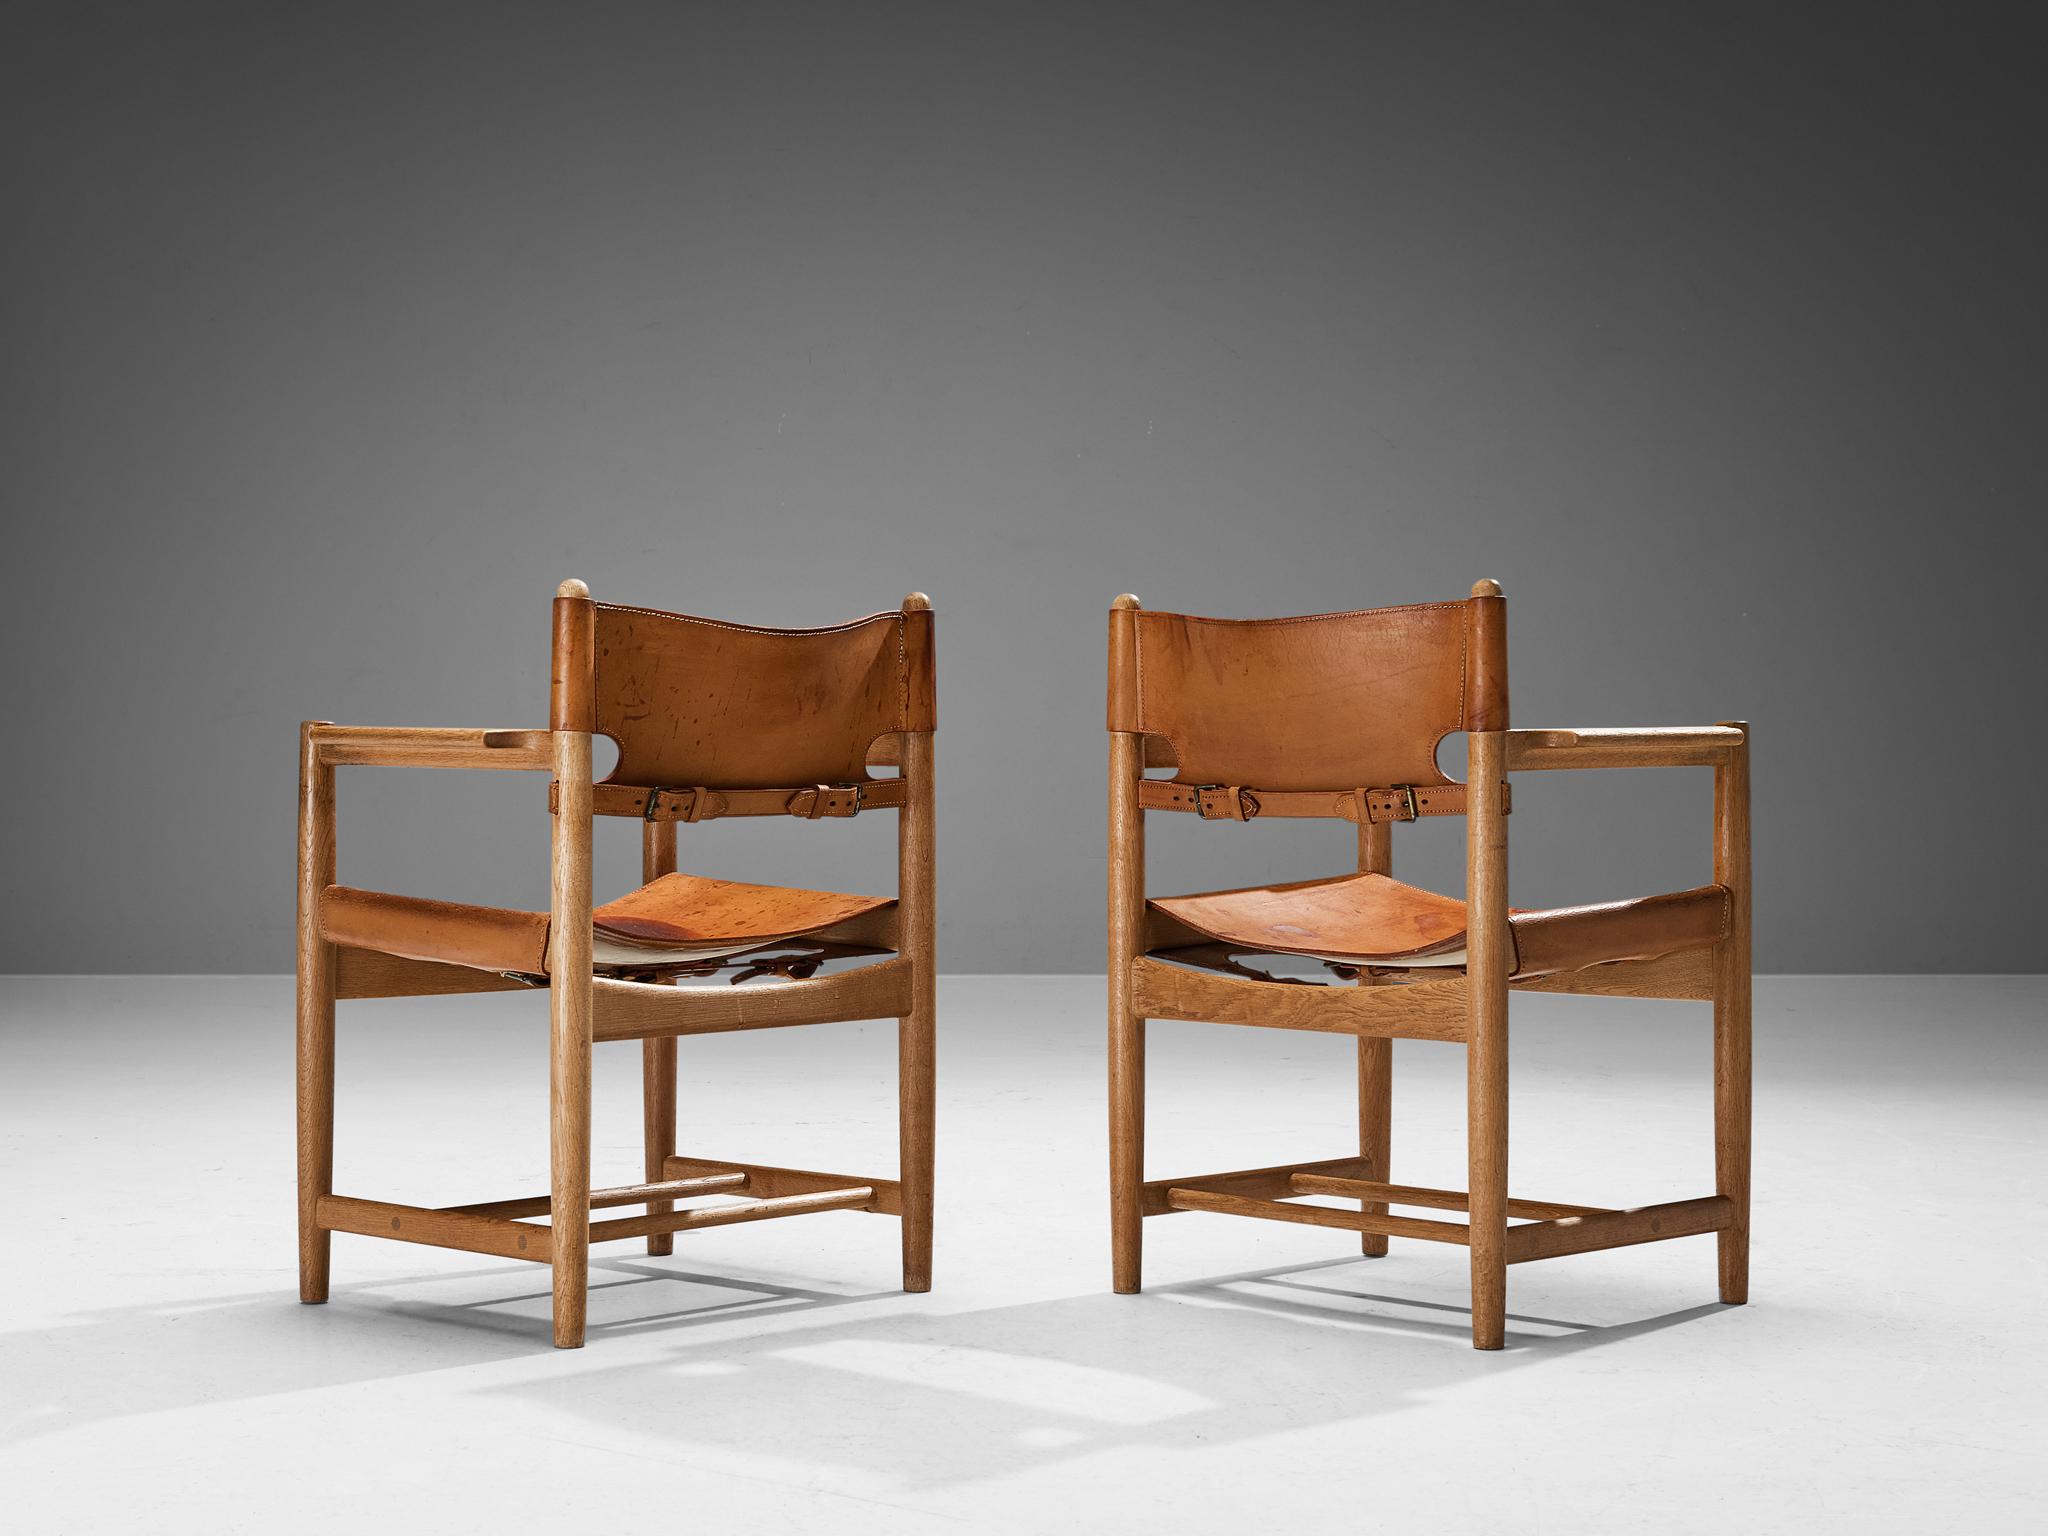 Børge Mogensen for Fredericia Stolefabrik, pair of armchairs model 3237, oak, leather, Denmark, 1964

This pair of armchairs reminds of the classical foldable 'director-chairs', yet this design by Danish designer Børge Mogensen (1914-1972) is from a